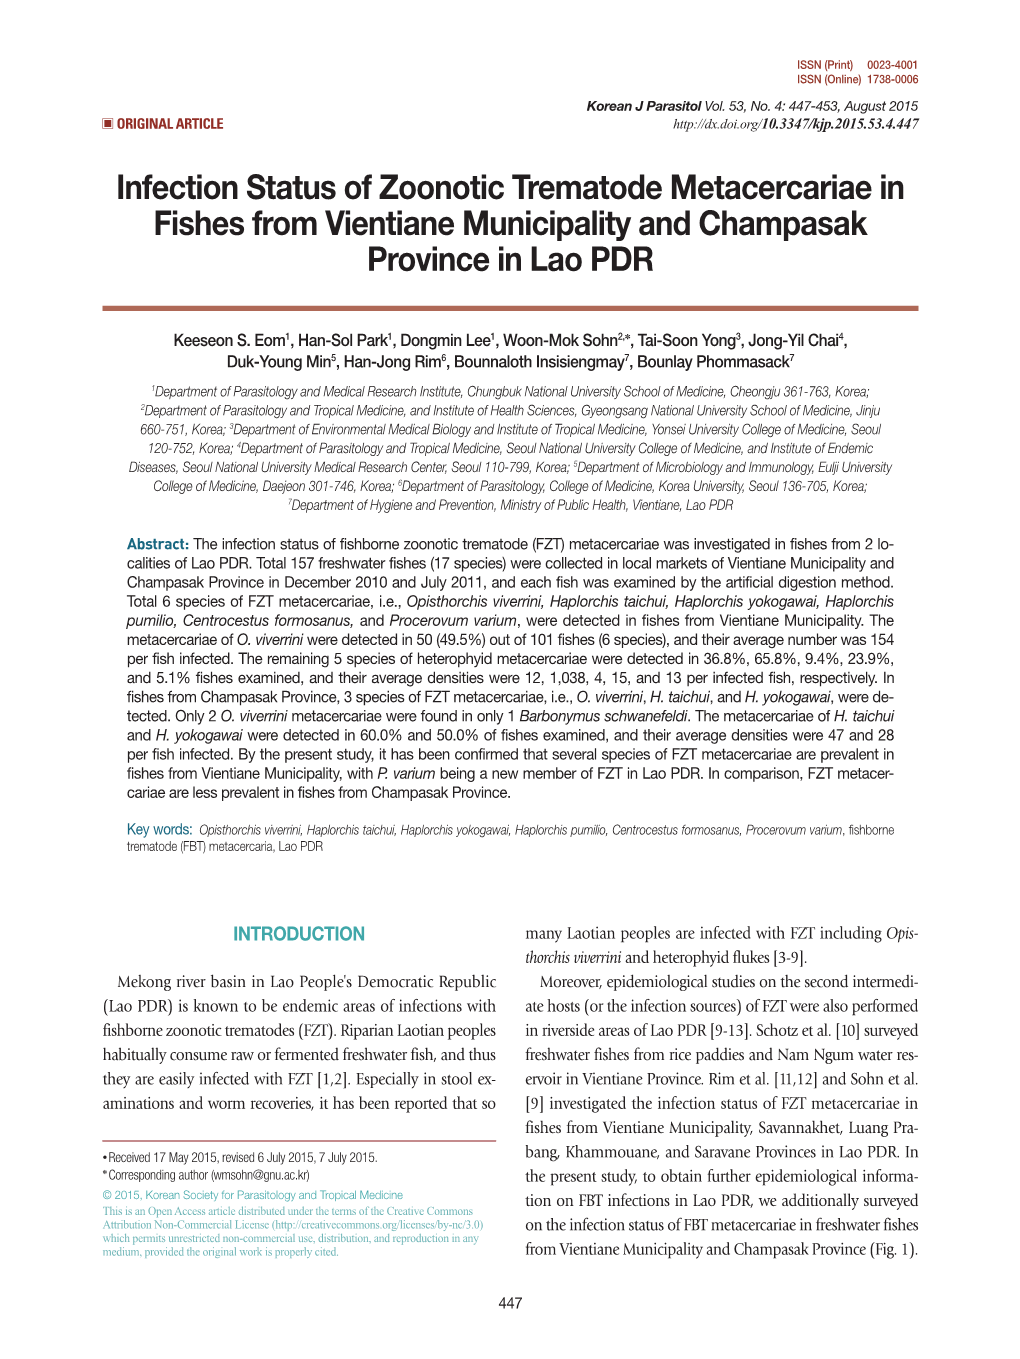 Infection Status of Zoonotic Trematode Metacercariae in Fishes from Vientiane Municipality and Champasak Province in Lao PDR